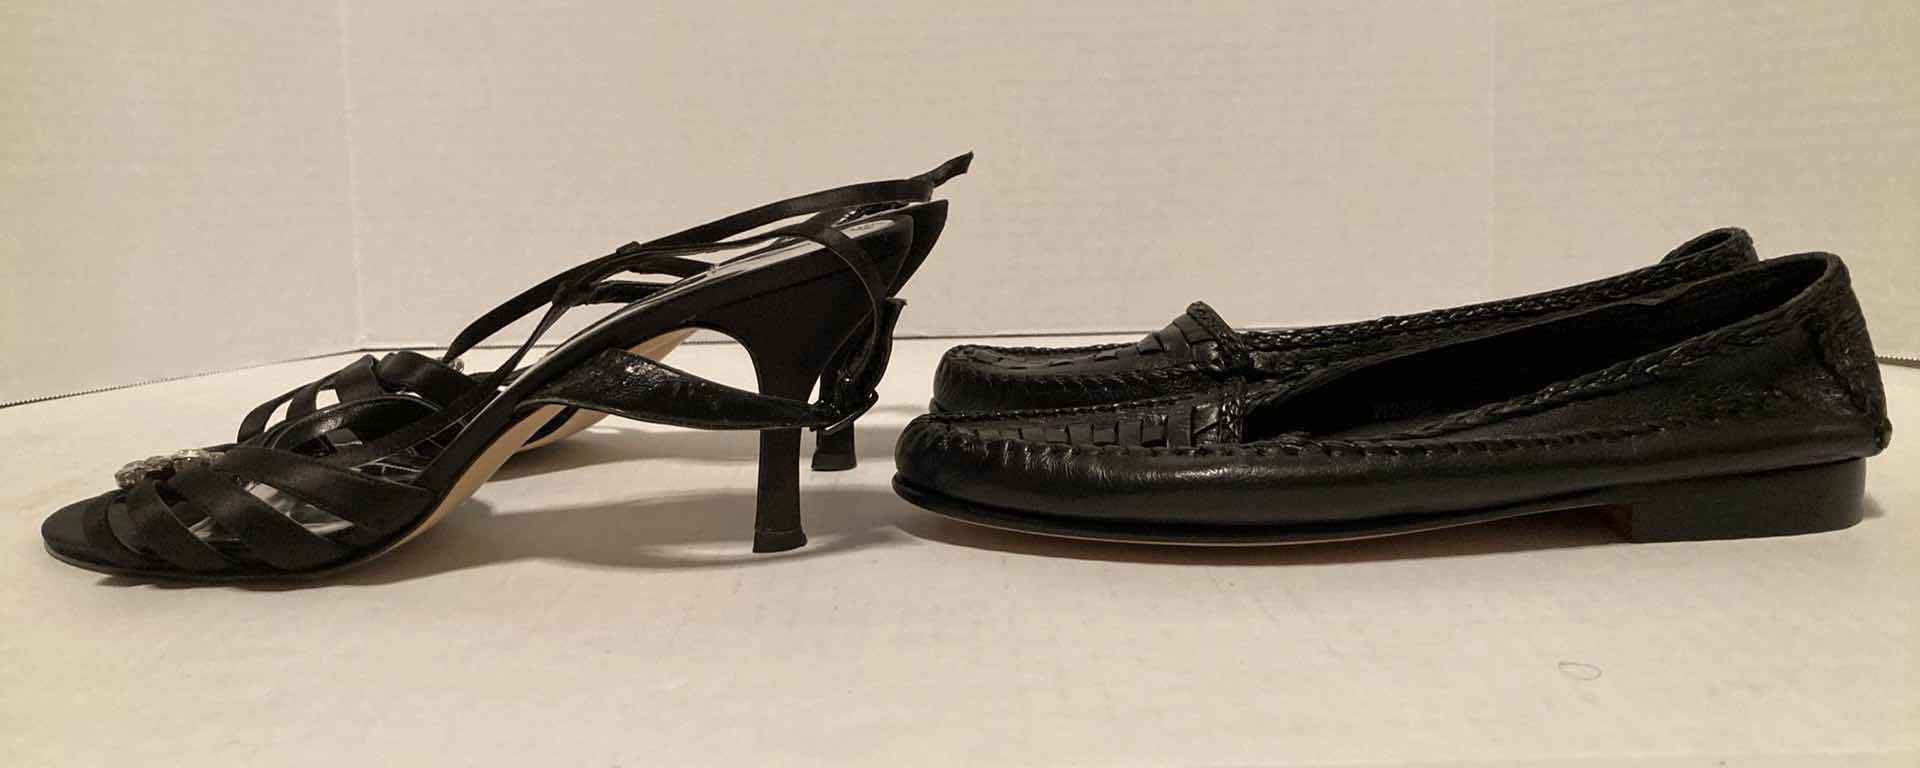 Photo 4 of CAPARROS BLACK OPEN TOE HEELS & COLE HAAN BLACK WOVEN LEATHER LOAFERS WOMEN’S SIZE 8-8.5